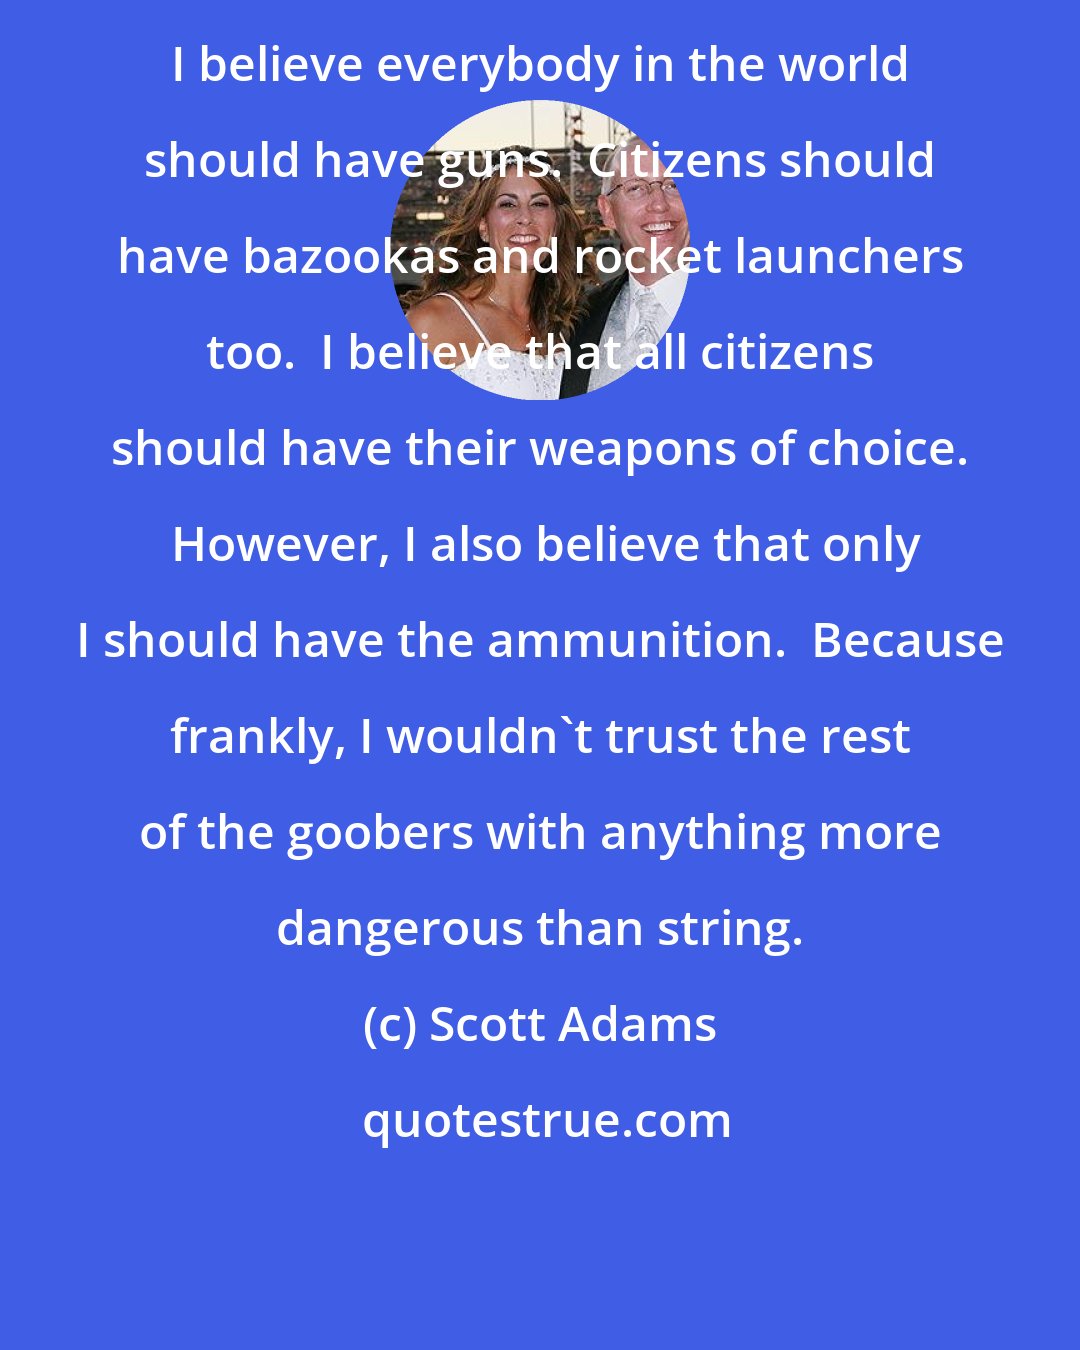 Scott Adams: I believe everybody in the world should have guns.  Citizens should have bazookas and rocket launchers too.  I believe that all citizens should have their weapons of choice.  However, I also believe that only I should have the ammunition.  Because frankly, I wouldn't trust the rest of the goobers with anything more dangerous than string.